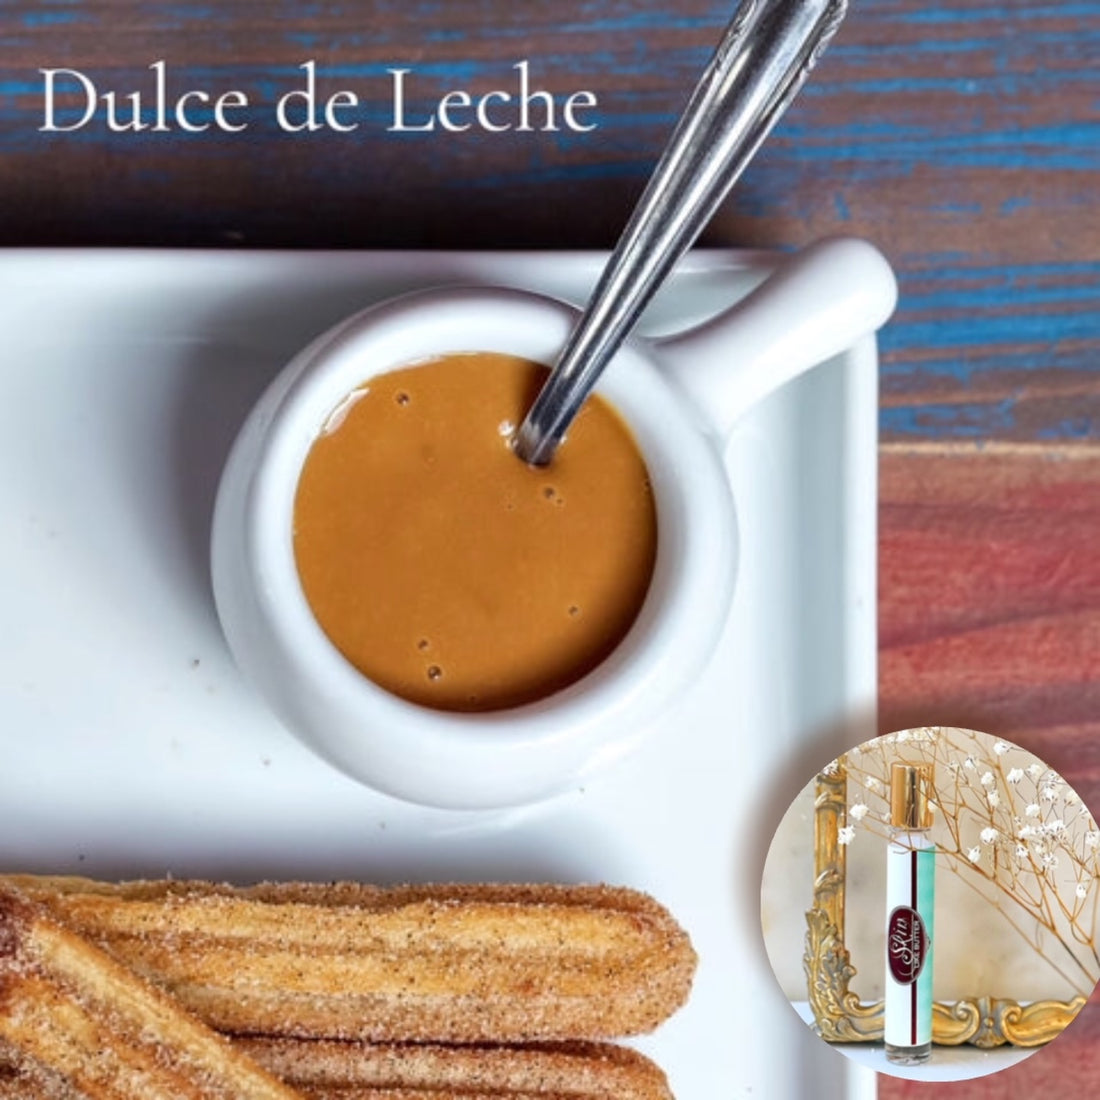 DULCE DE LECHE Roll on Perfume Sale! ~ Buy 1 get 1 50% off-use coupon code 2PLEASE